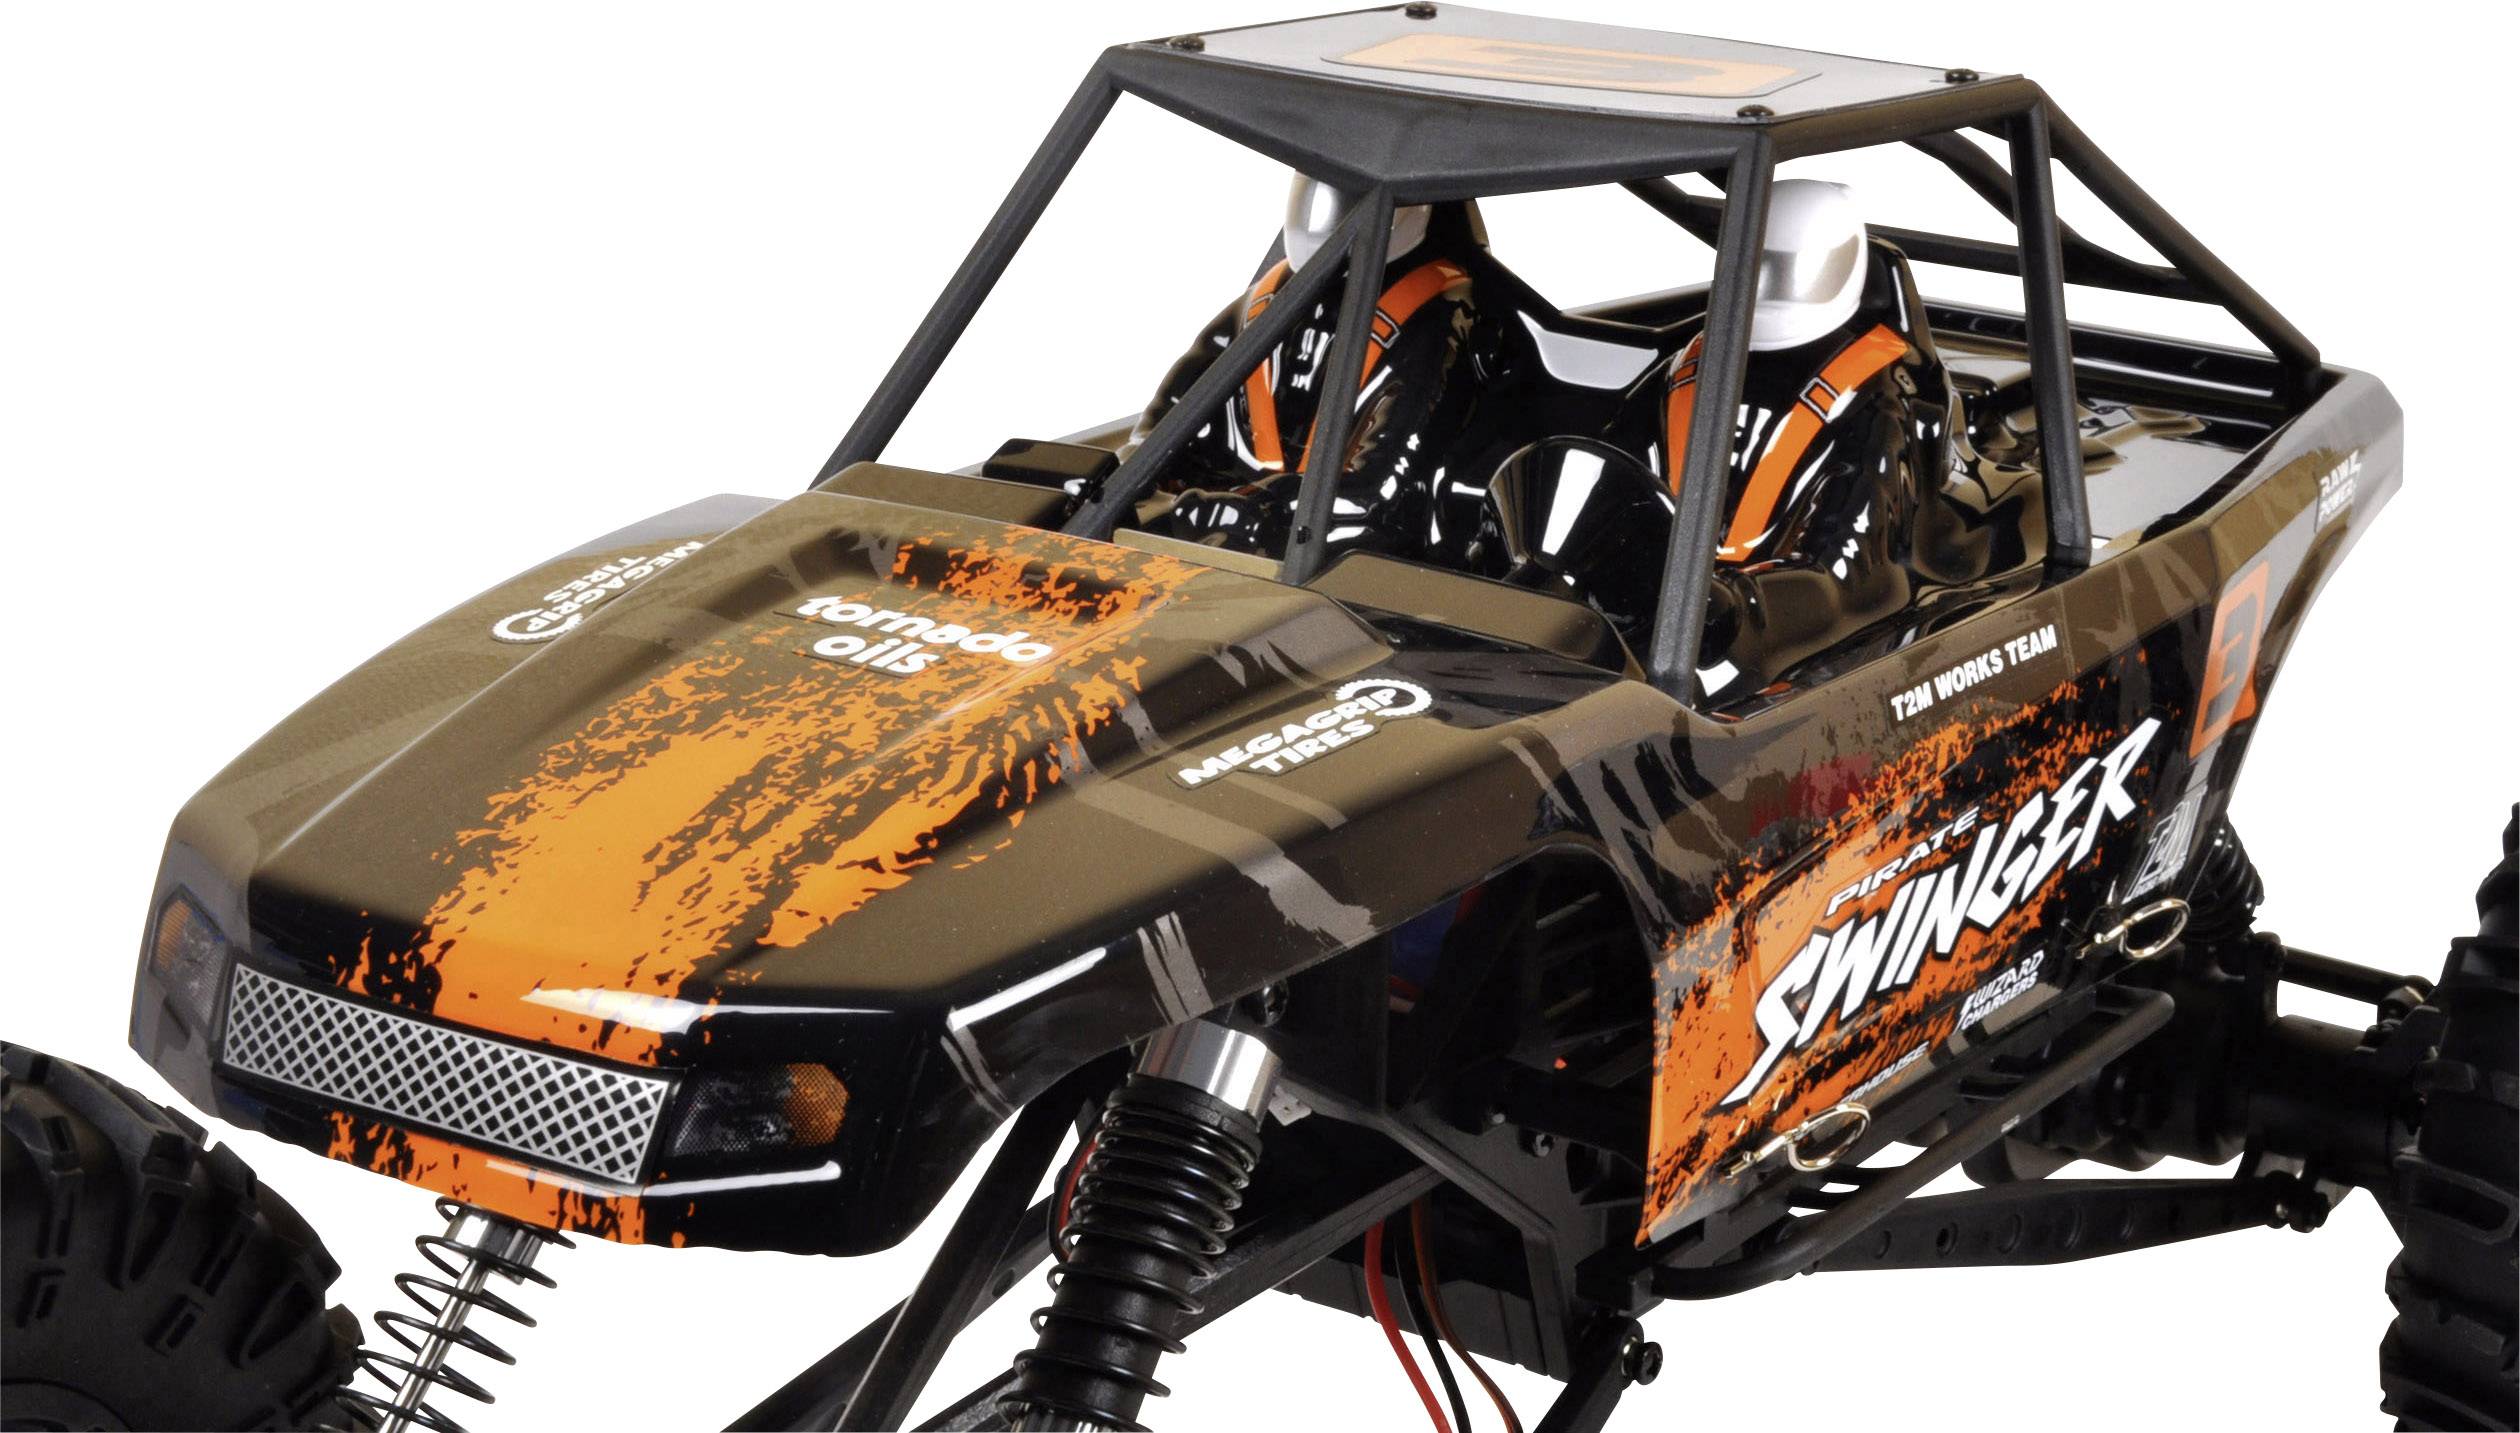 T2M Crawler Pirate Swinger Brushed 110 Automodello Elettrica 4WD RTR 2,4 GHz 